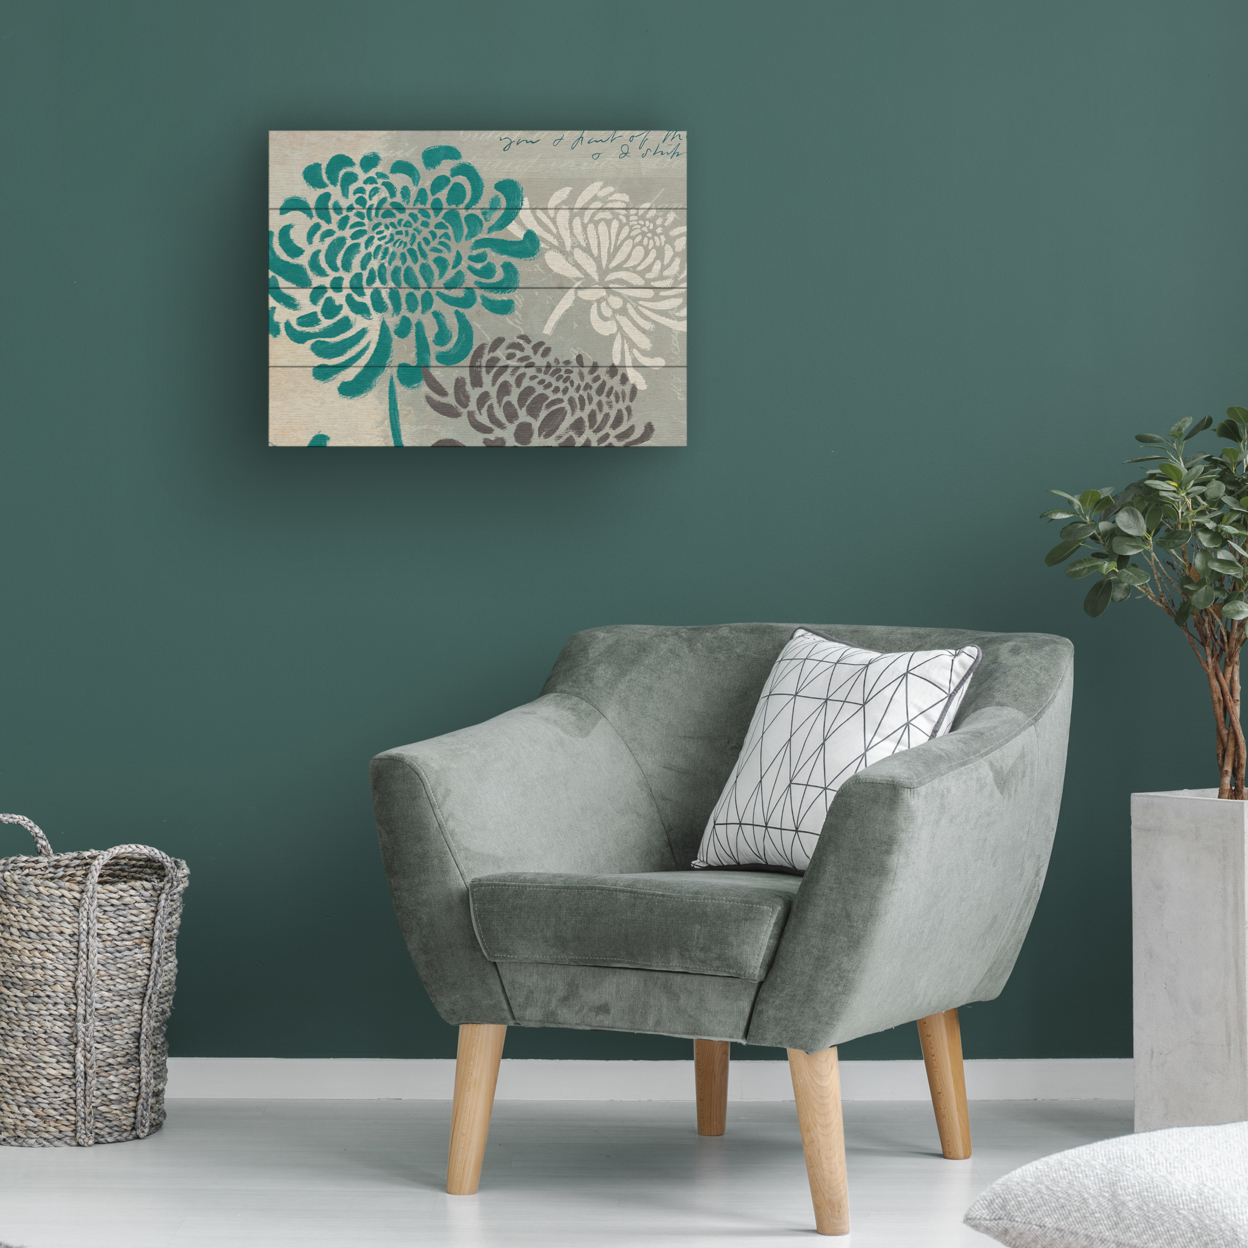 Wall Art 12 X 16 Inches Titled Chrysanthemums I Ready To Hang Printed On Wooden Planks